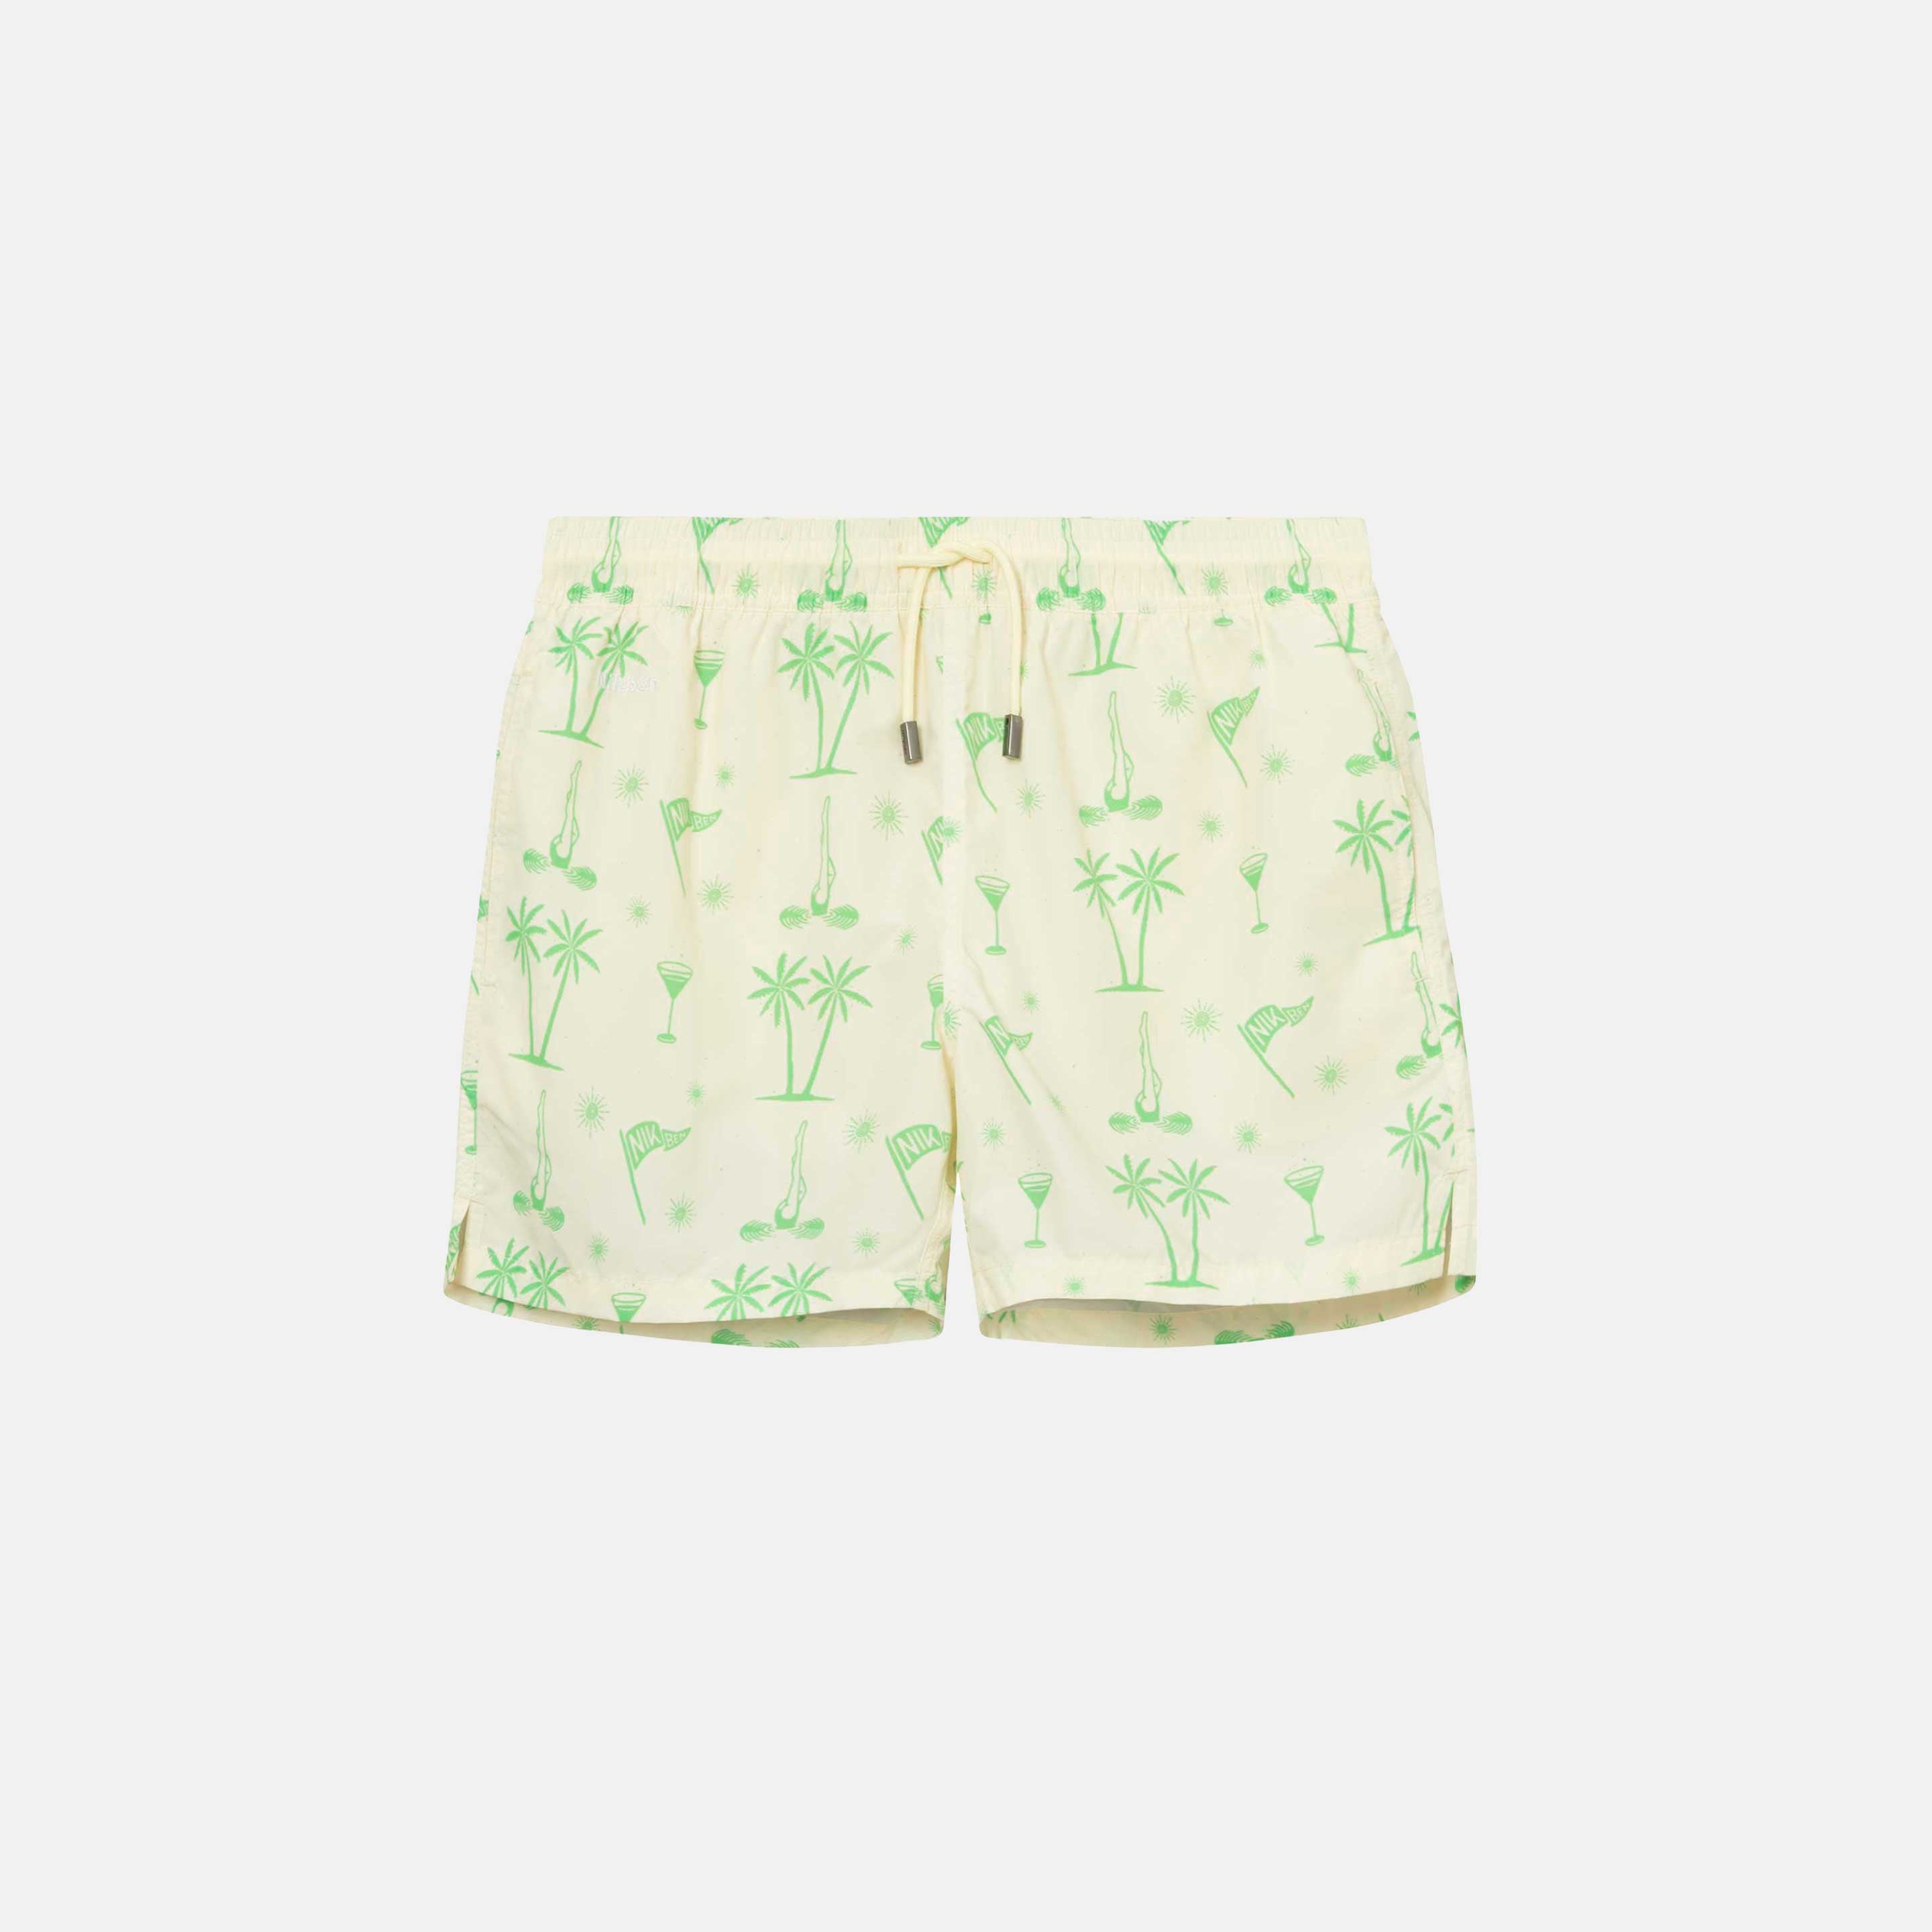 Pale yellow swim trunks with green pattern. Mid length shorts with drawstring waistband and two side pockets.